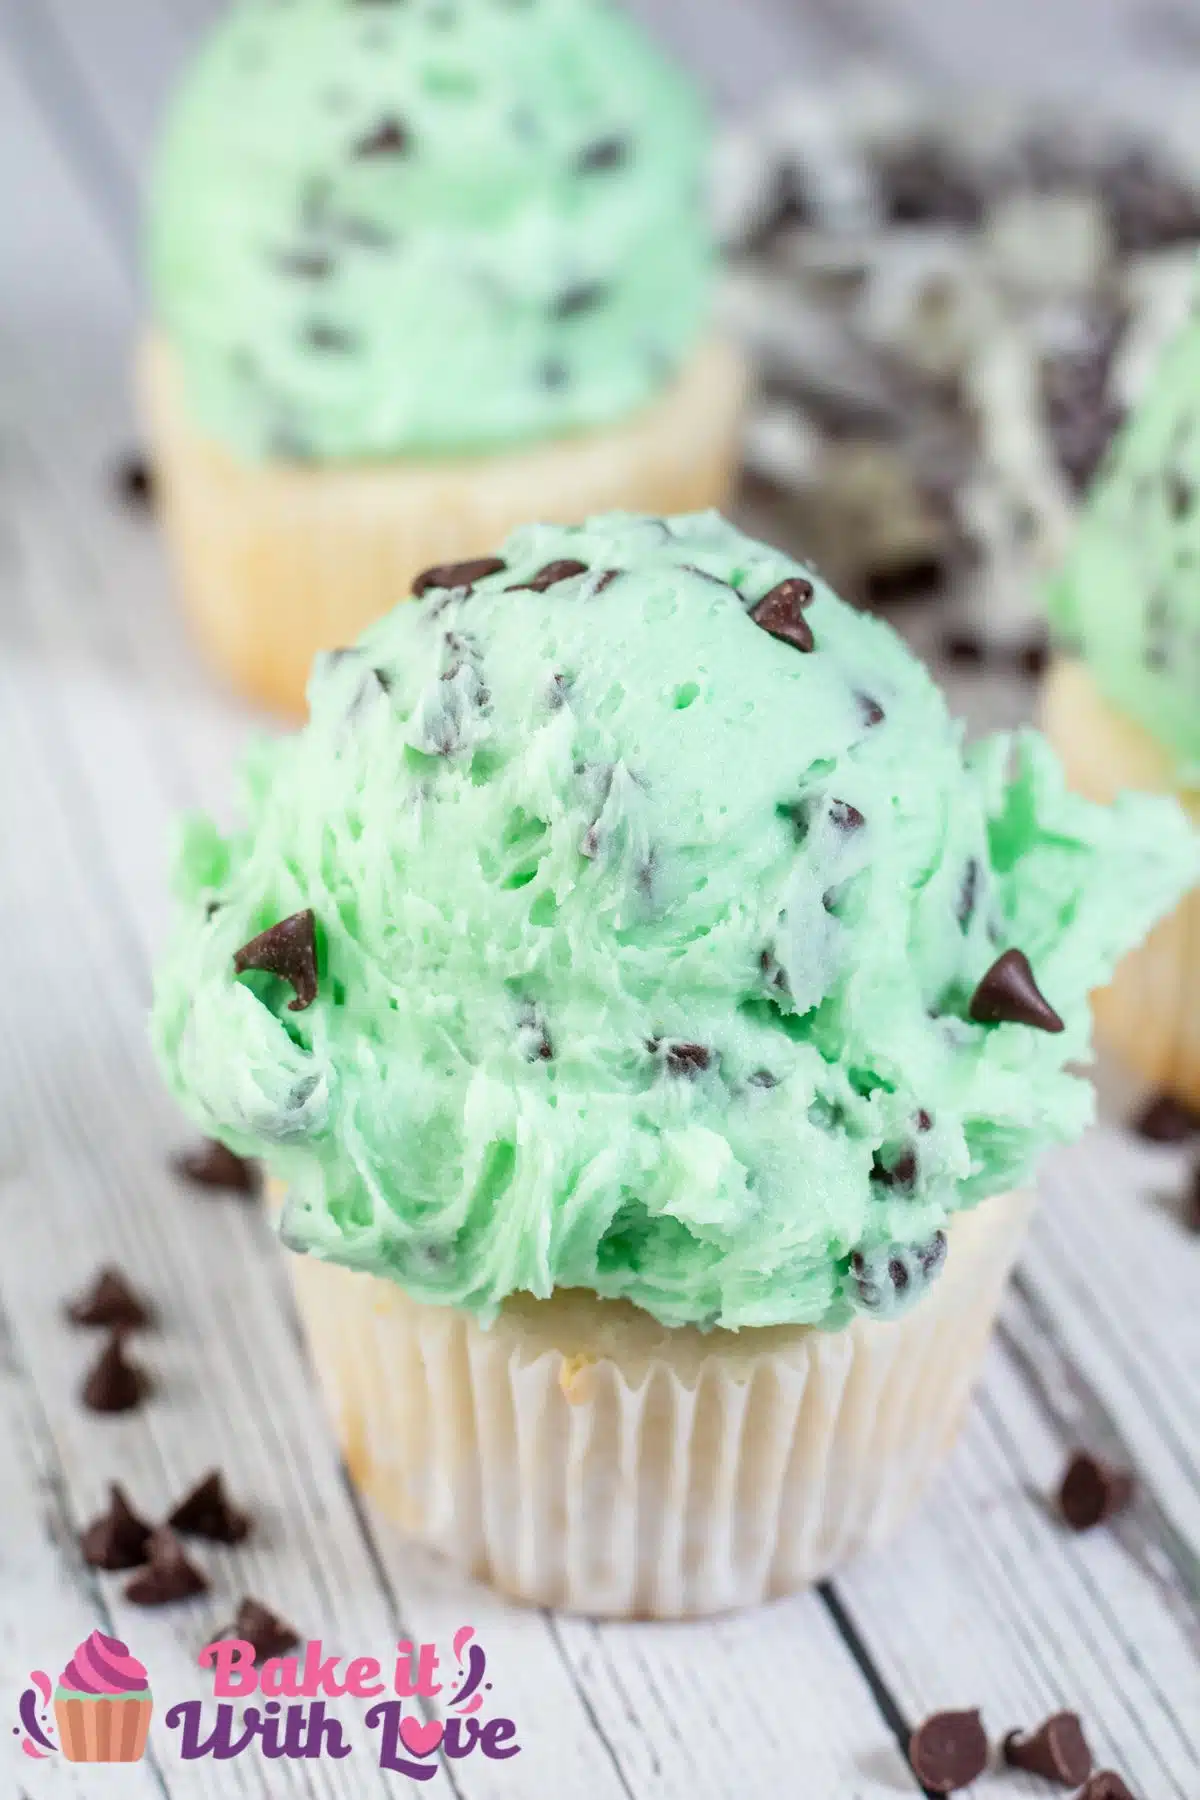 Tall image showing mint chocolate chip buttercream frosting on a cupcake.